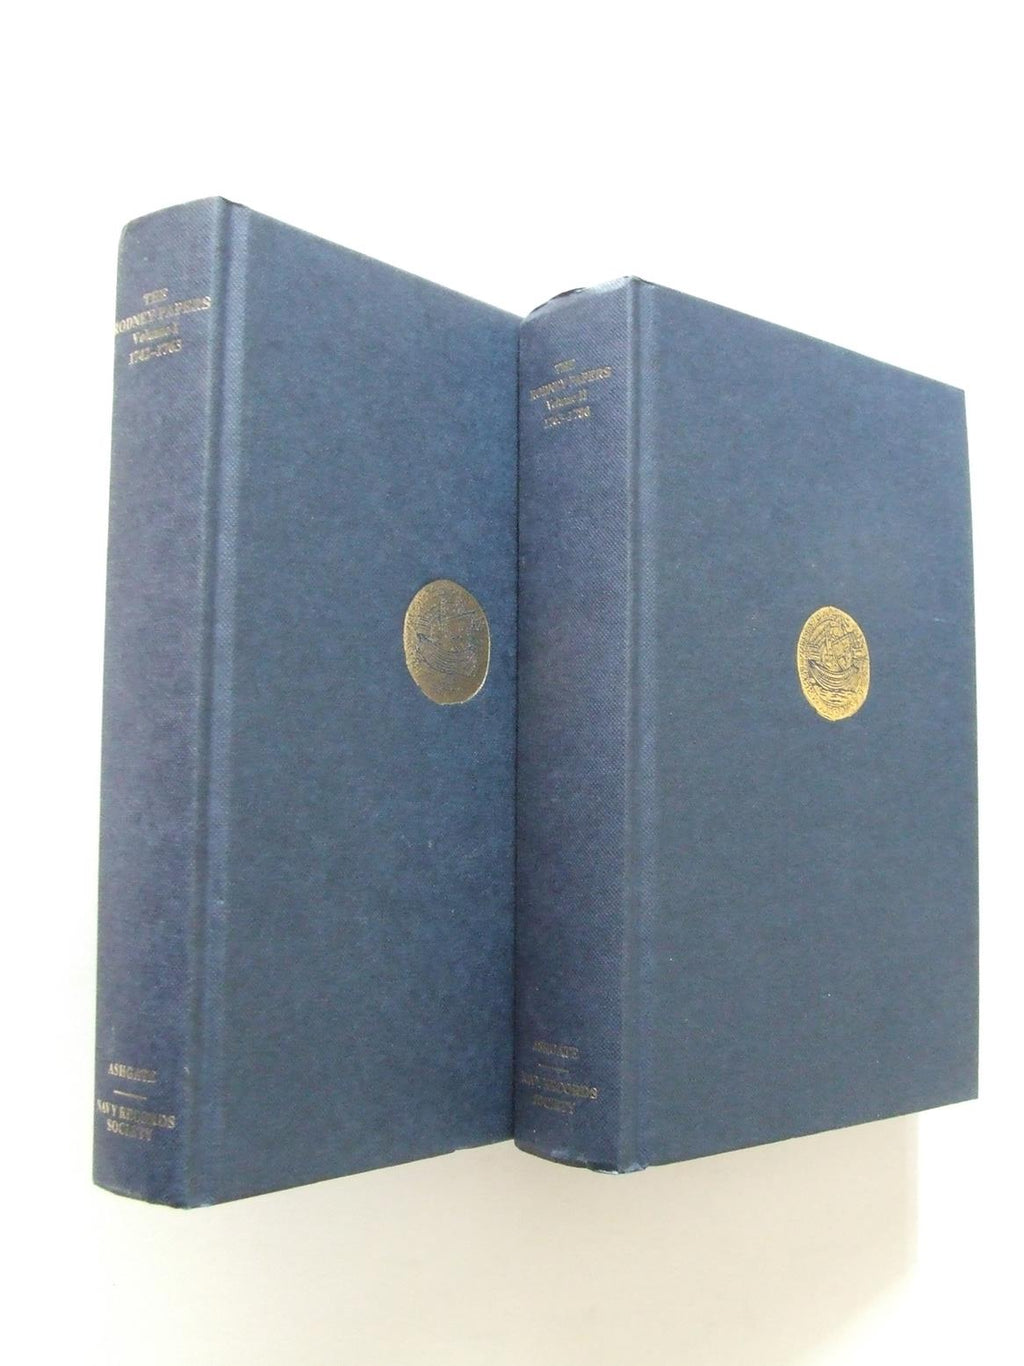 The Rodney Papers, selections from the correspondence of Admiral Lord Rodney